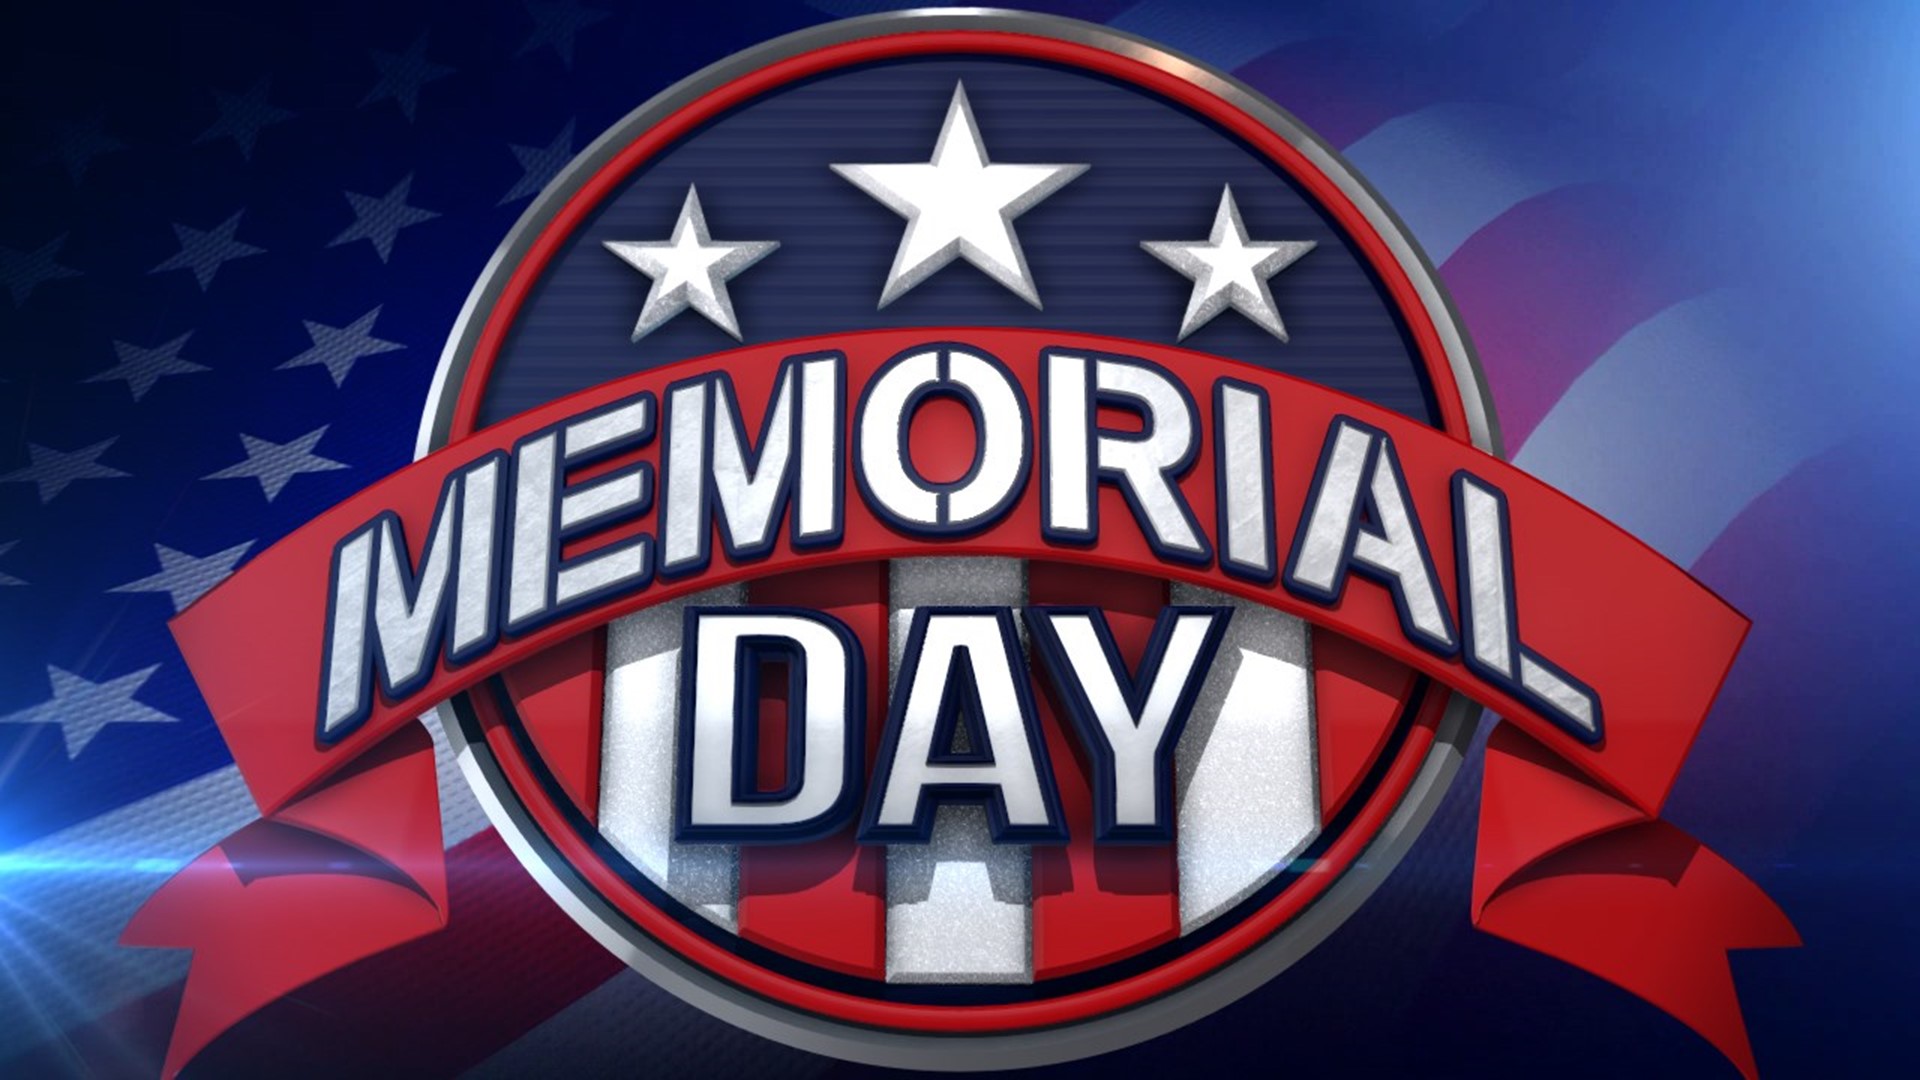 Here are some Memorial Day Weekend events in Central Texas